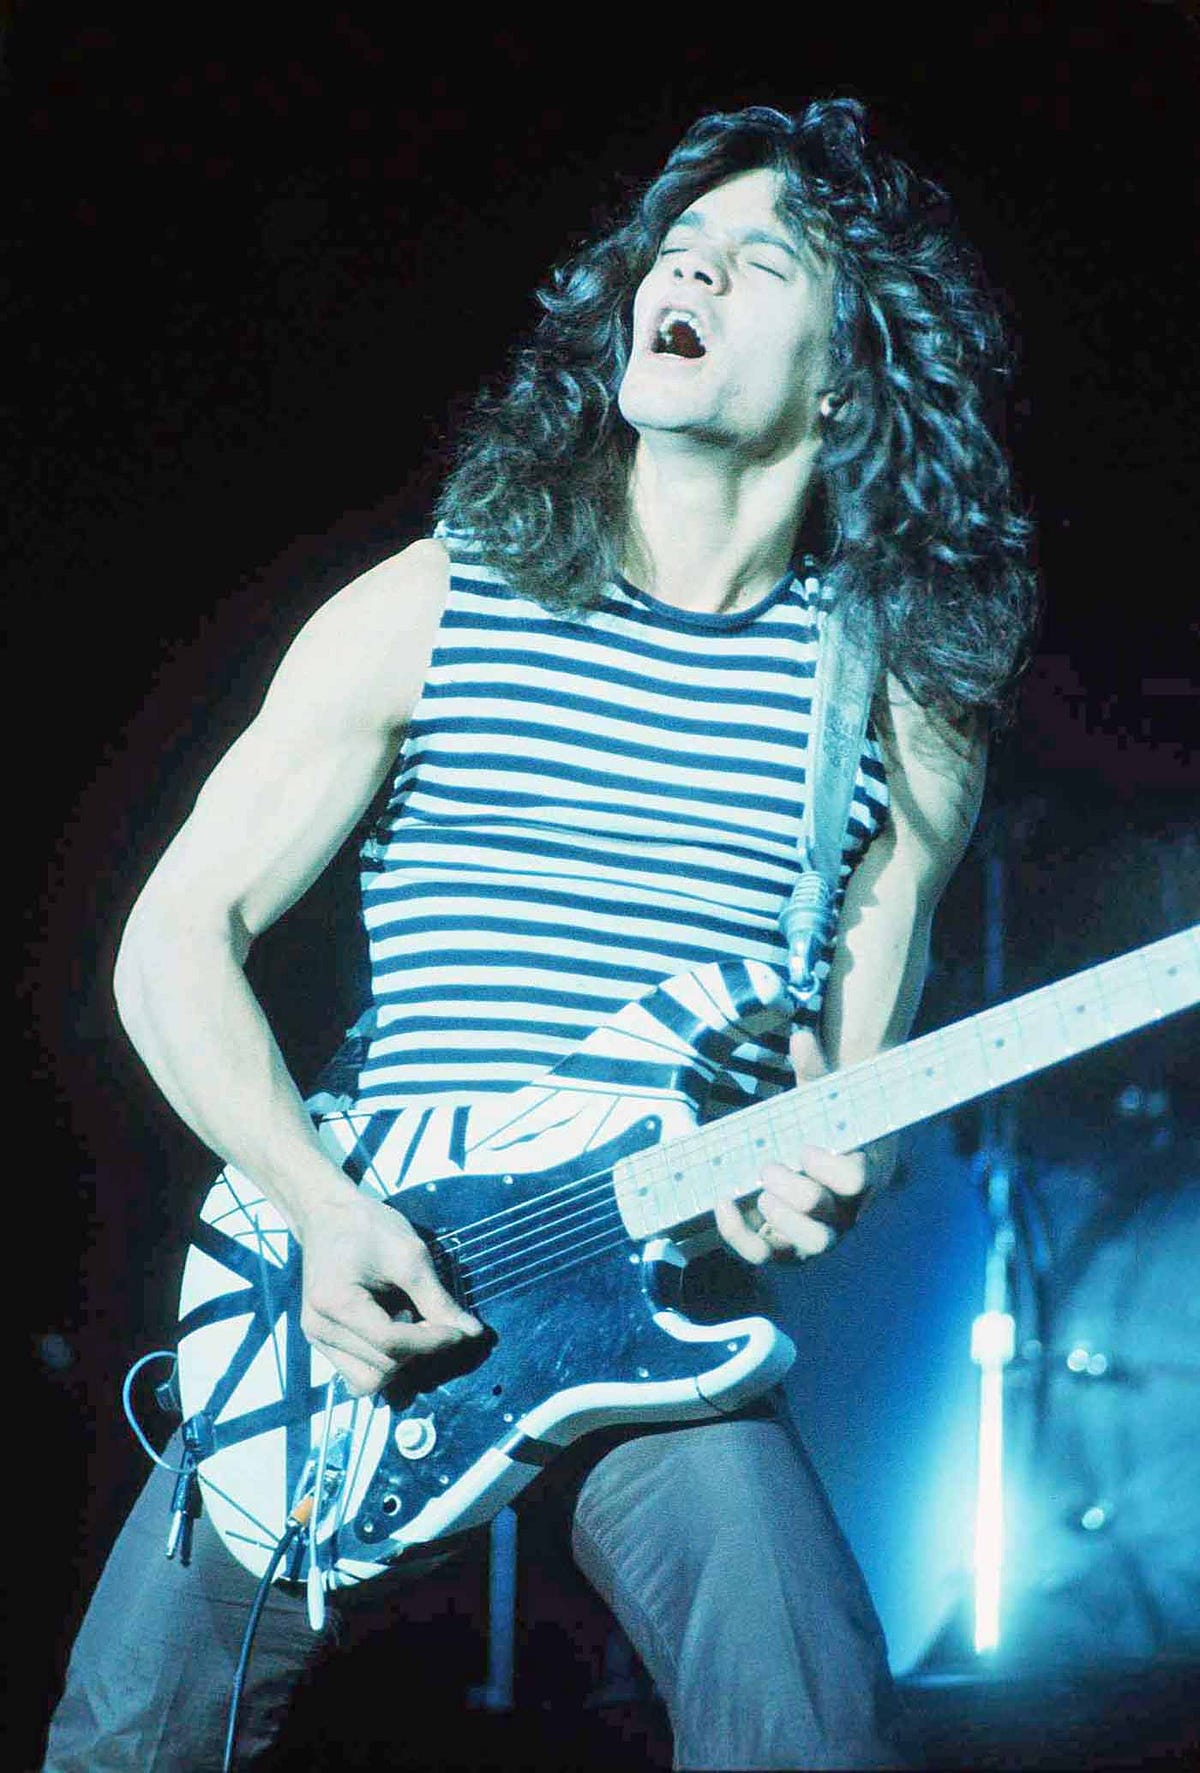 For The Love Of Eddie Van Halen This 80s Girl Doesn T Want To Let Go By Pamela Hazelton The Work Life Balance Medium Sur.ly for wordpress sur.ly plugin for wordpress is free of charge. for the love of eddie van halen this